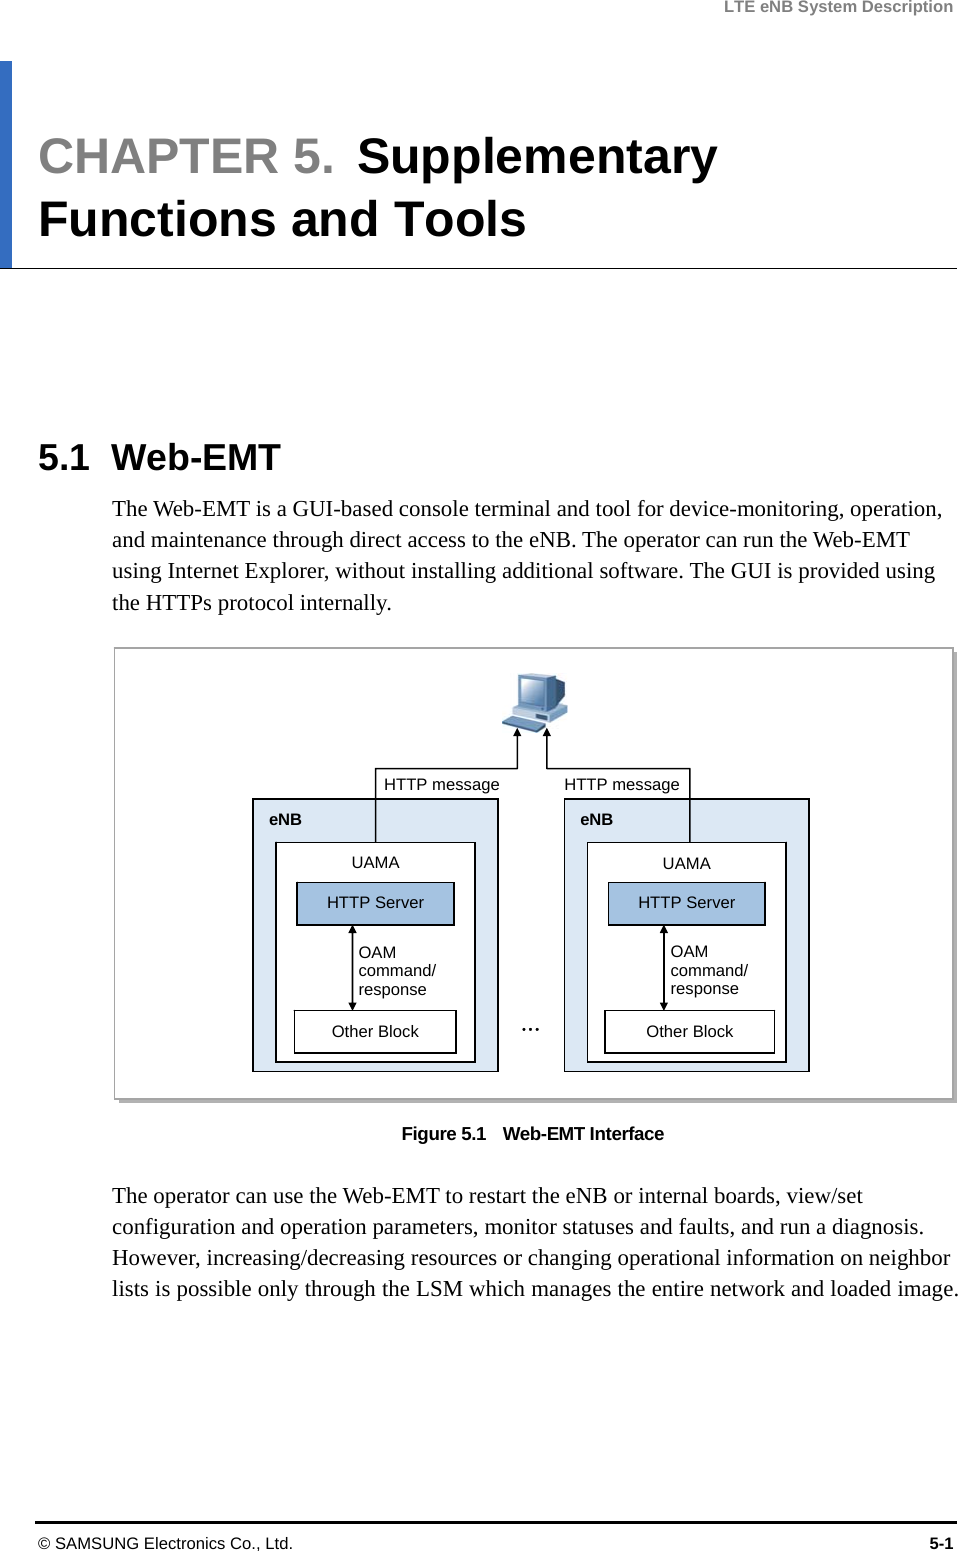 LTE eNB System Description CHAPTER 5.  Supplementary Functions and Tools      5.1 Web-EMT The Web-EMT is a GUI-based console terminal and tool for device-monitoring, operation, and maintenance through direct access to the eNB. The operator can run the Web-EMT using Internet Explorer, without installing additional software. The GUI is provided using the HTTPs protocol internally.  Figure 5.1    Web-EMT Interface  The operator can use the Web-EMT to restart the eNB or internal boards, view/set configuration and operation parameters, monitor statuses and faults, and run a diagnosis.  However, increasing/decreasing resources or changing operational information on neighbor lists is possible only through the LSM which manages the entire network and loaded image.   eNB UAMA HTTP Server Other Block OAM  command/ response eNB HTTP message  HTTP message UAMA HTTP Server OAM  command/ response …Other Block © SAMSUNG Electronics Co., Ltd.  5-1 